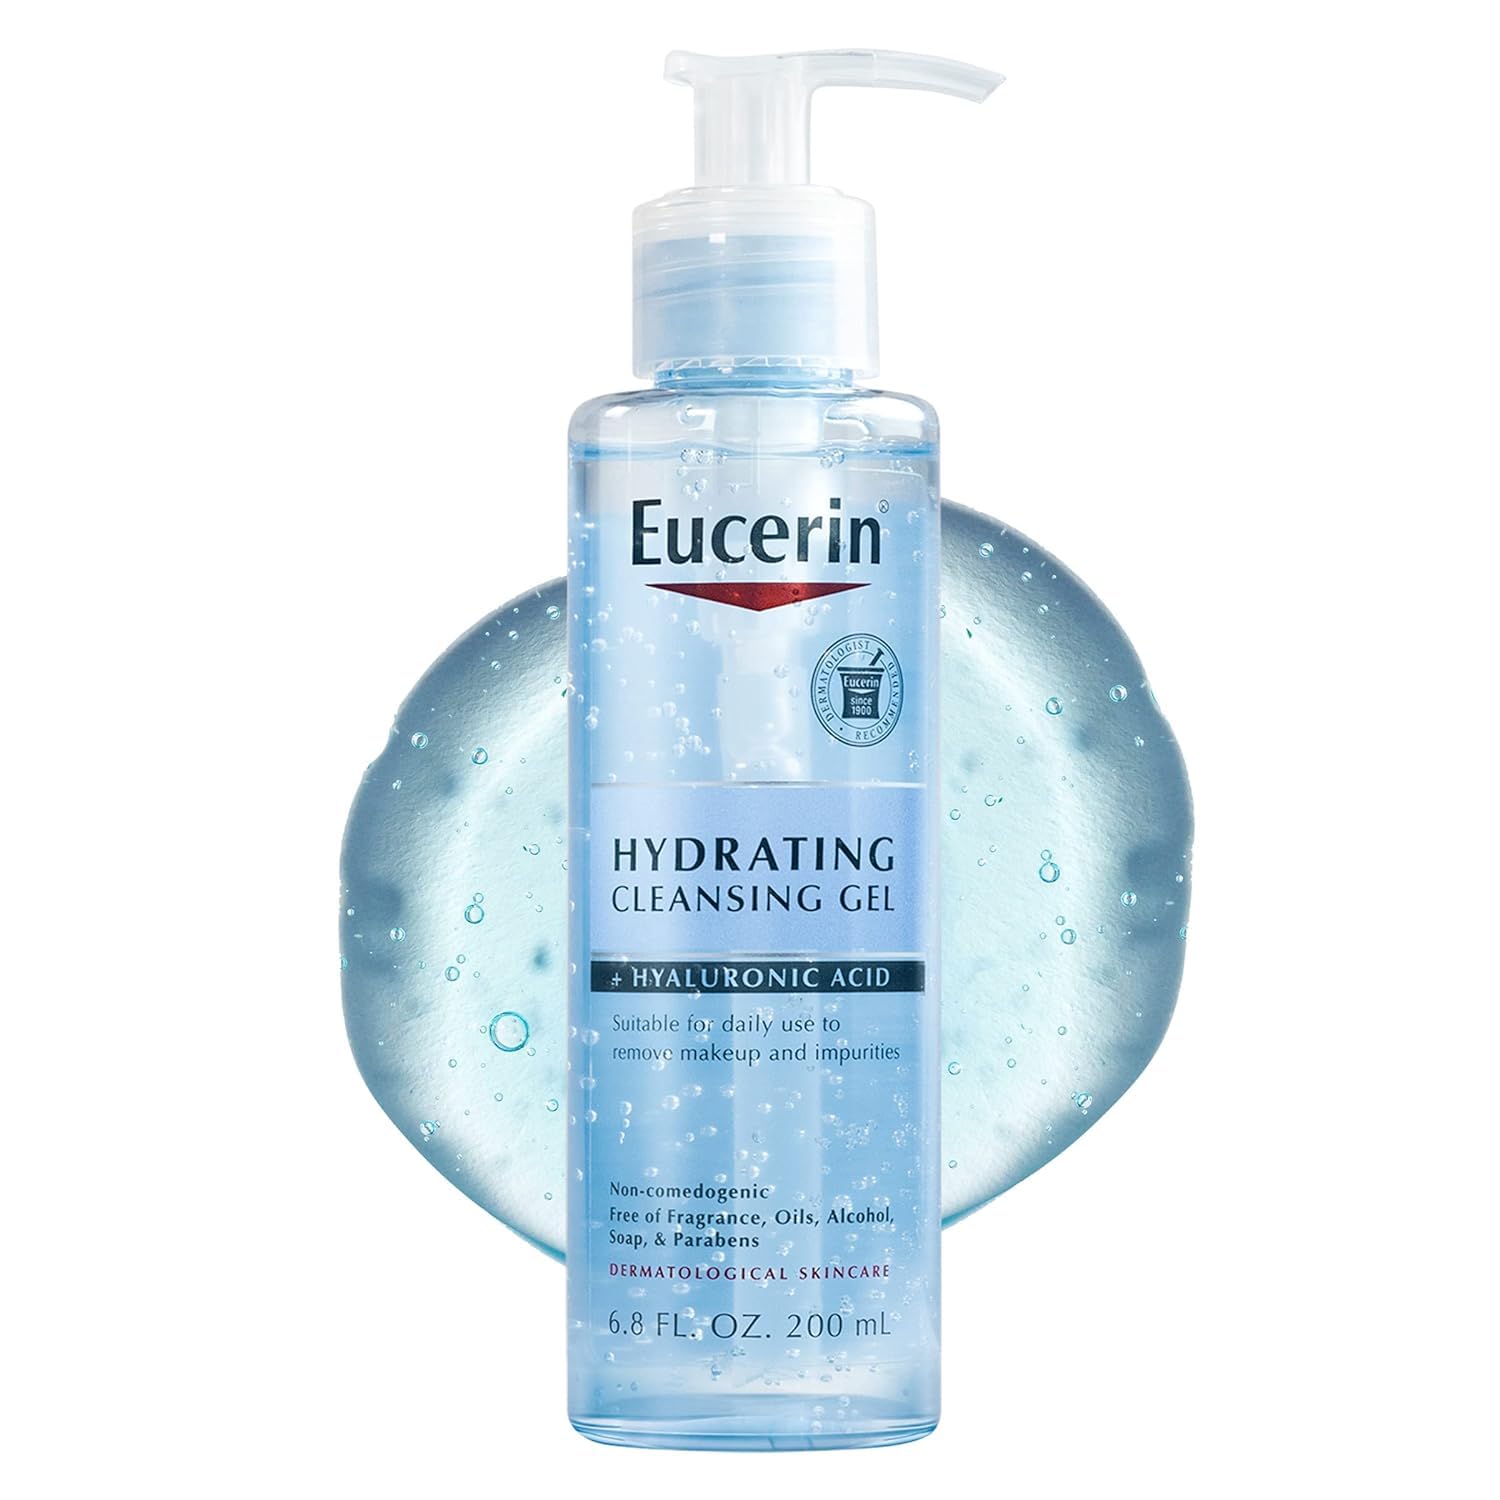 6.8-Oz Eucerin Hydrating Cleansing Gel w/ Hyaluronic Acid $6.97 w/ S&S + Free Shipping w/ Prime or on $35+